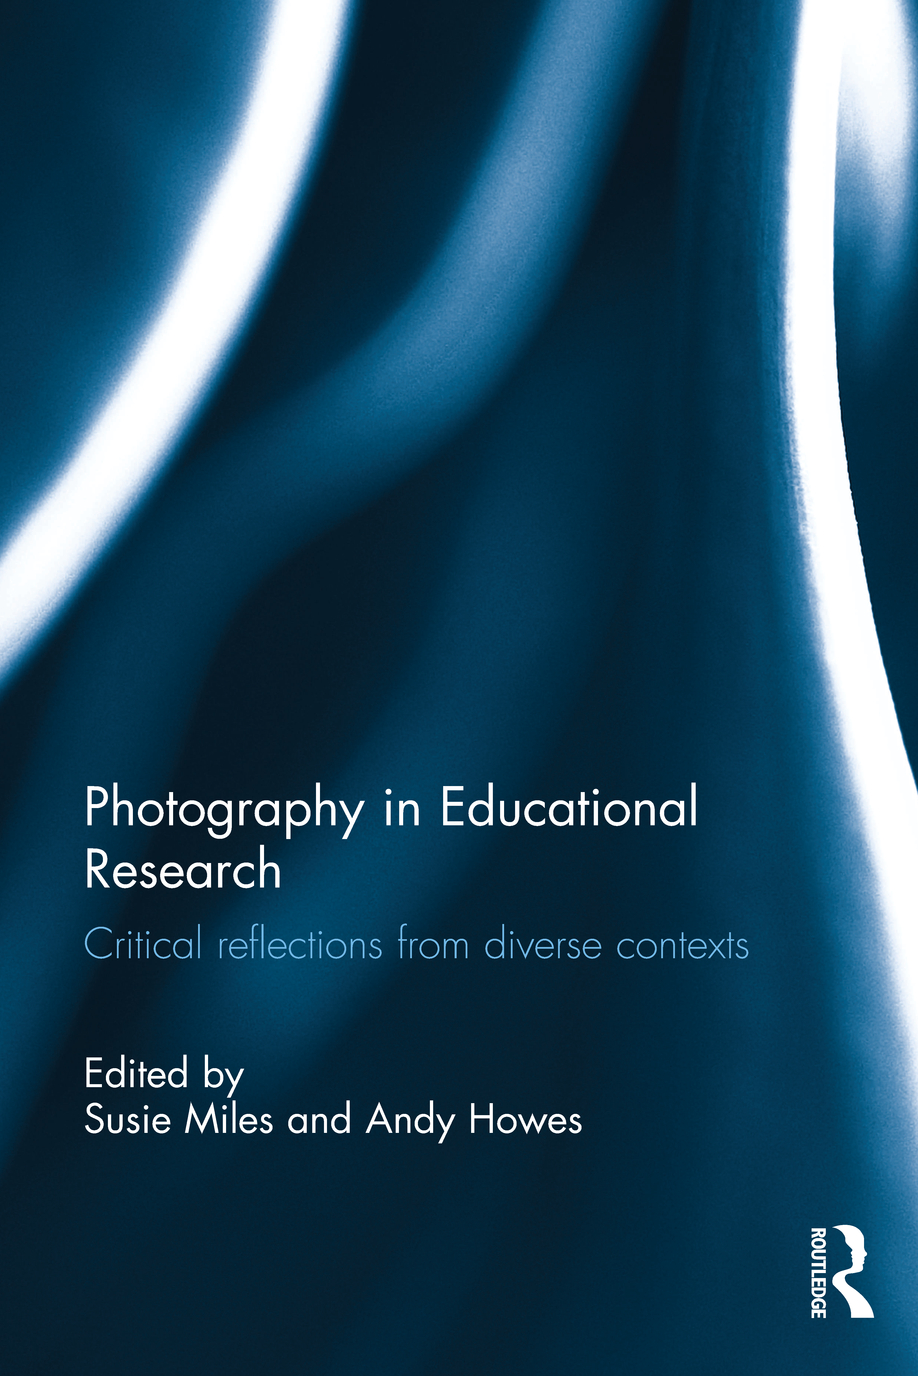 Photography in Educational Research - Susie Miles, Andy Howes